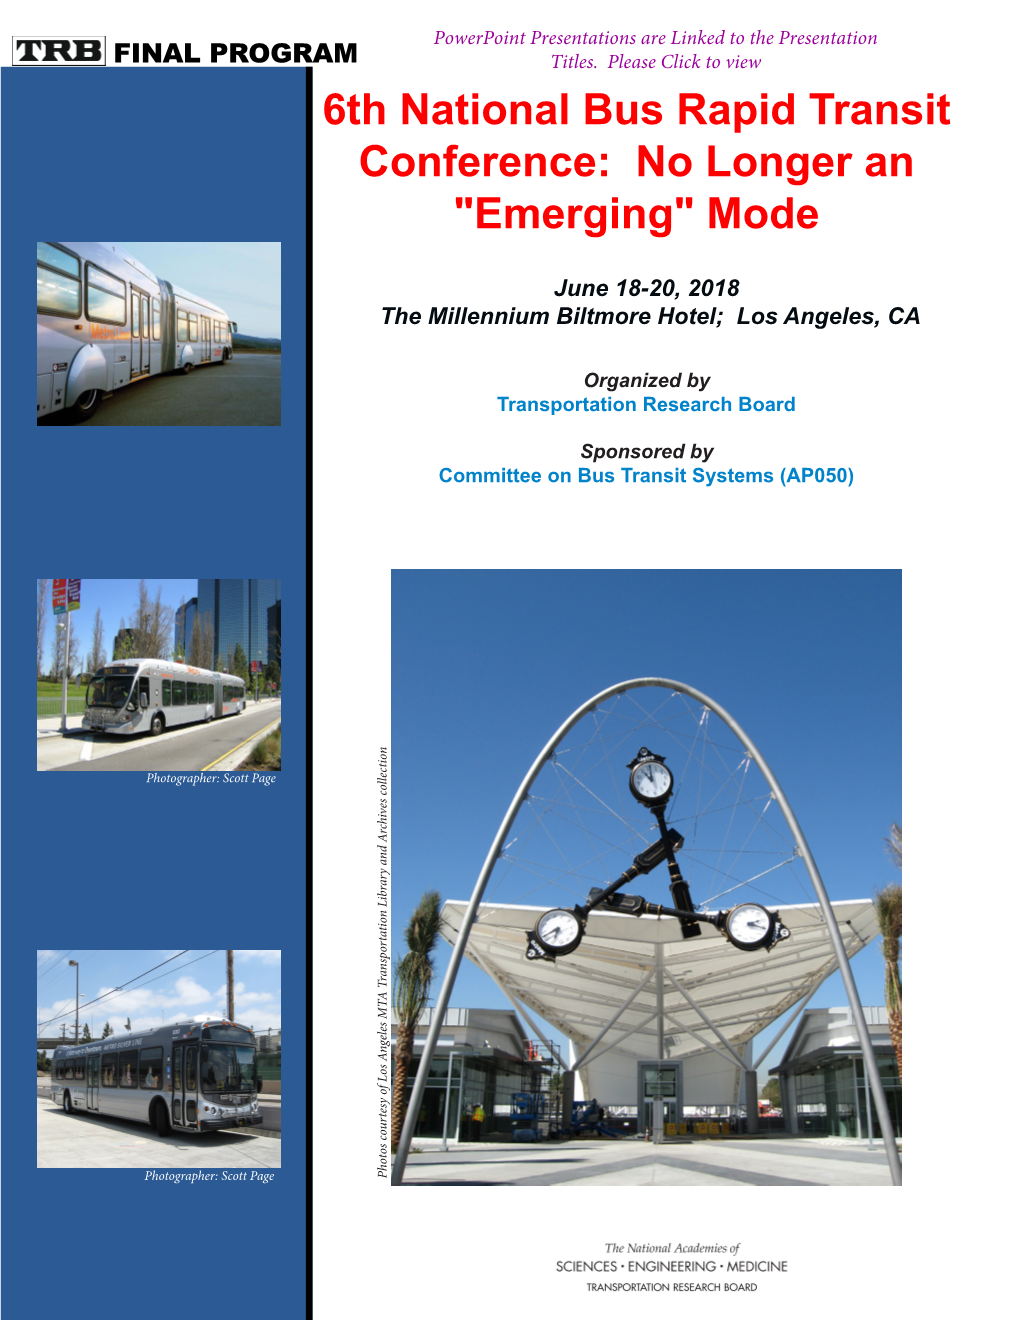 6Th National Bus Rapid Transit Conference: No Longer an "Emerging" Mode